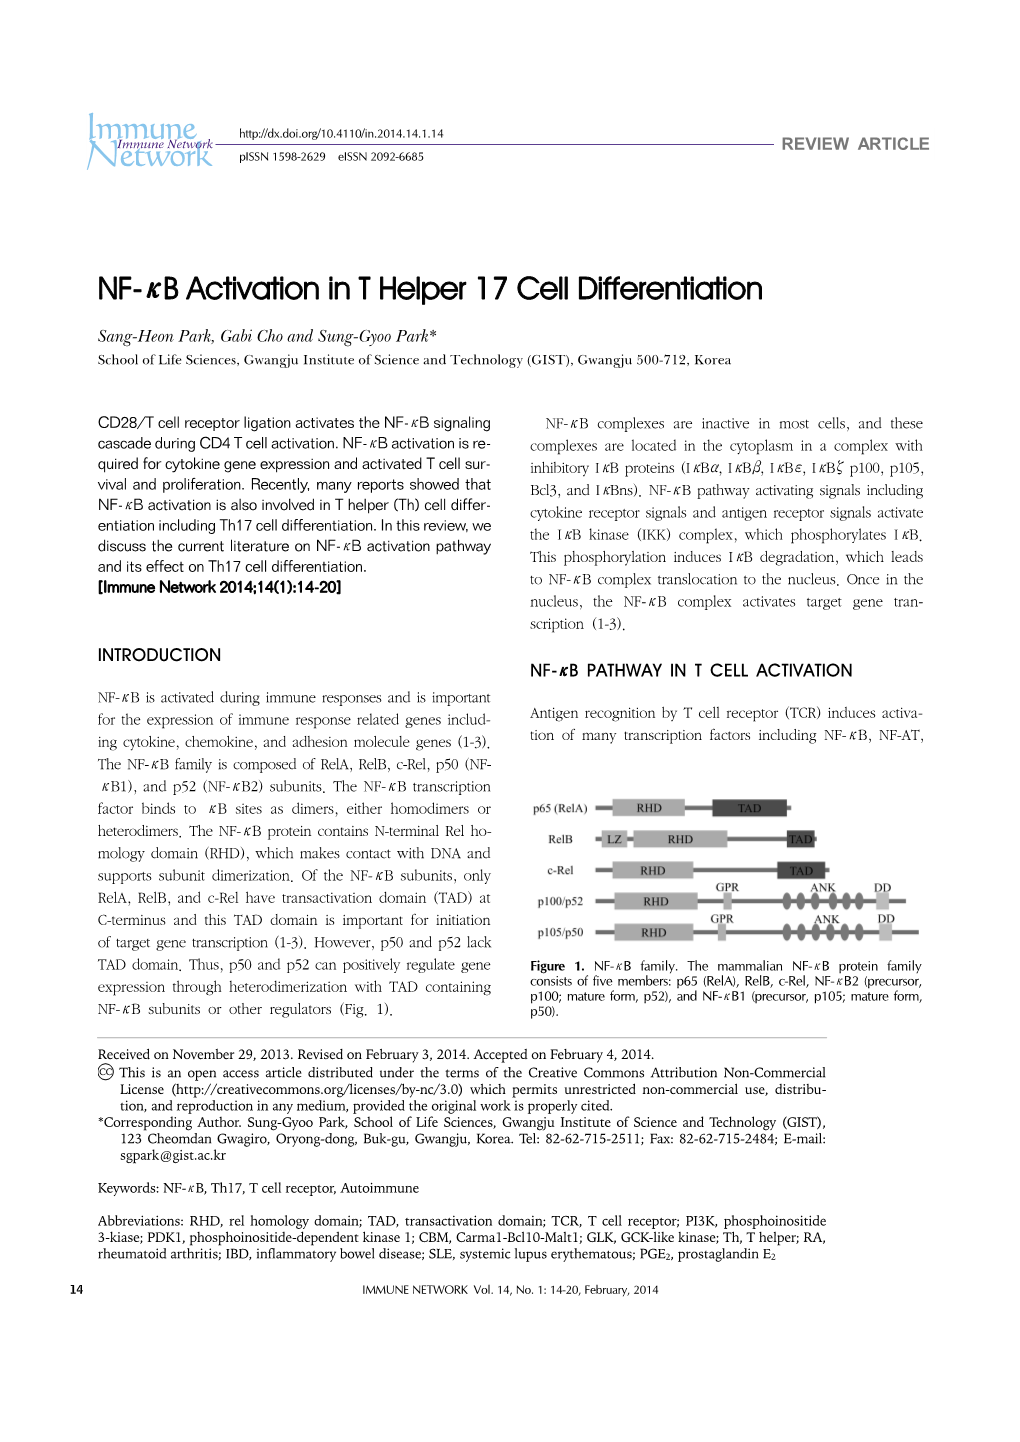 NF-Κb Activation in T Helper 17 Cell Differentiation